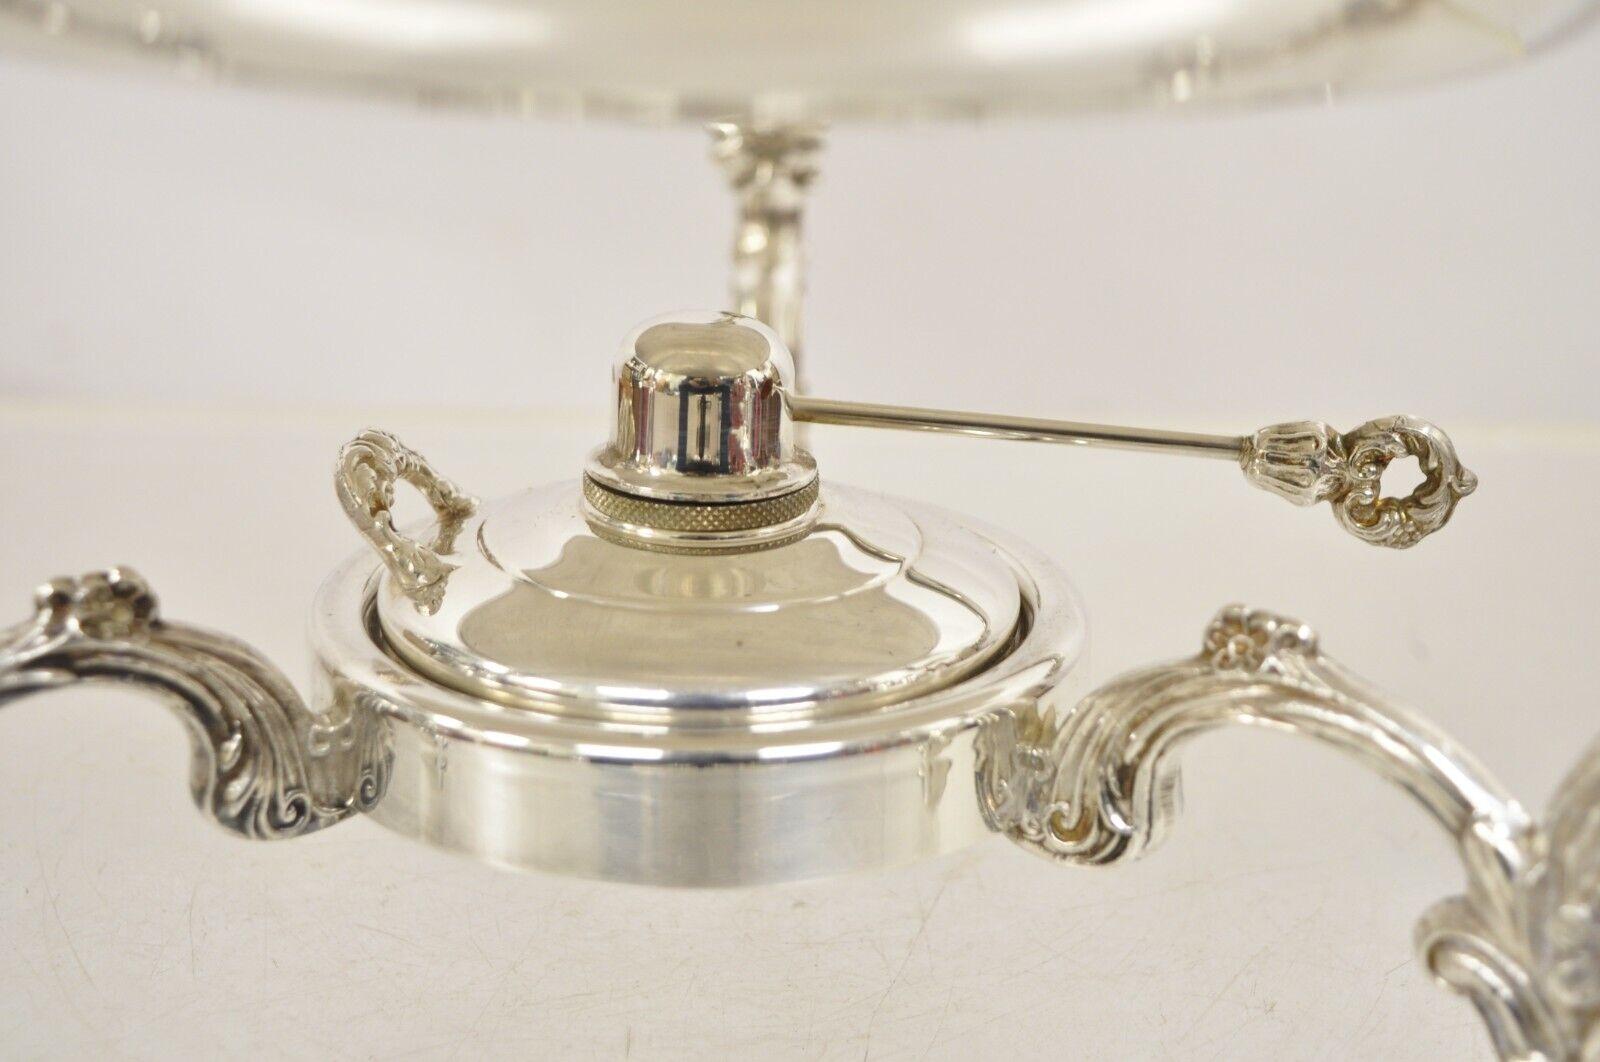 Vintage Victorian Style Ornate Silver Plated Chafing Dish Food Warmer w/ Burner For Sale 5